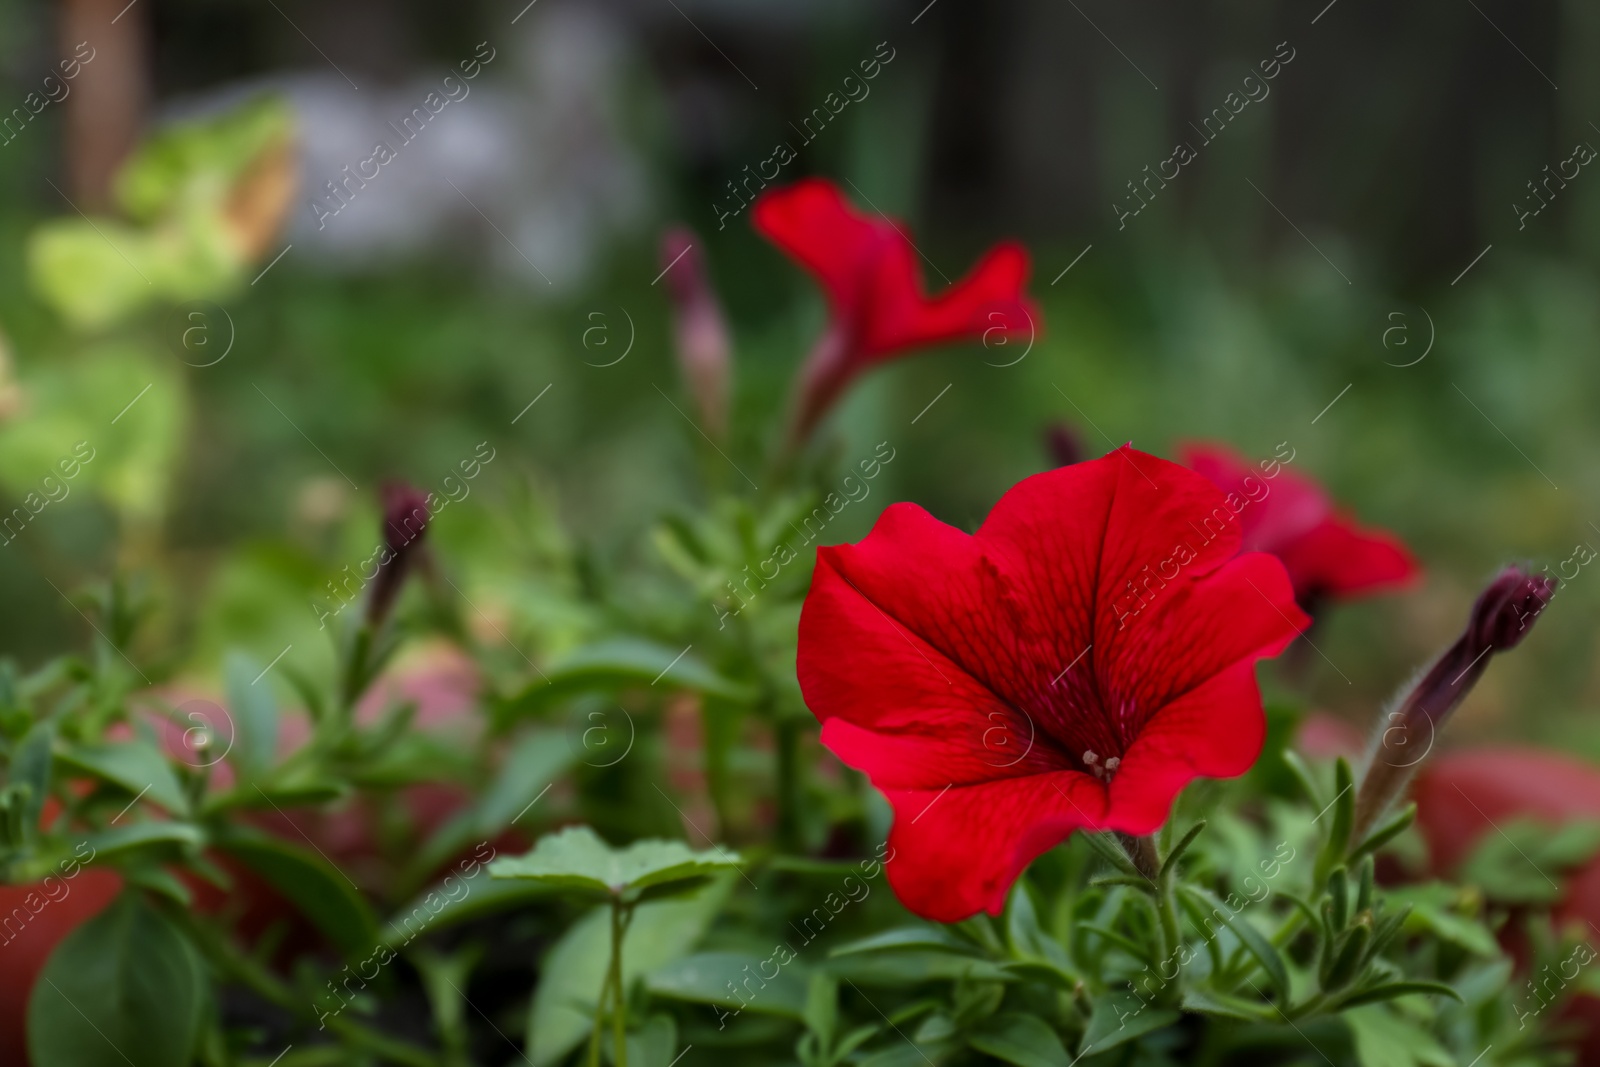 Photo of Beautiful potted petunia plant with red flower outdoors, closeup